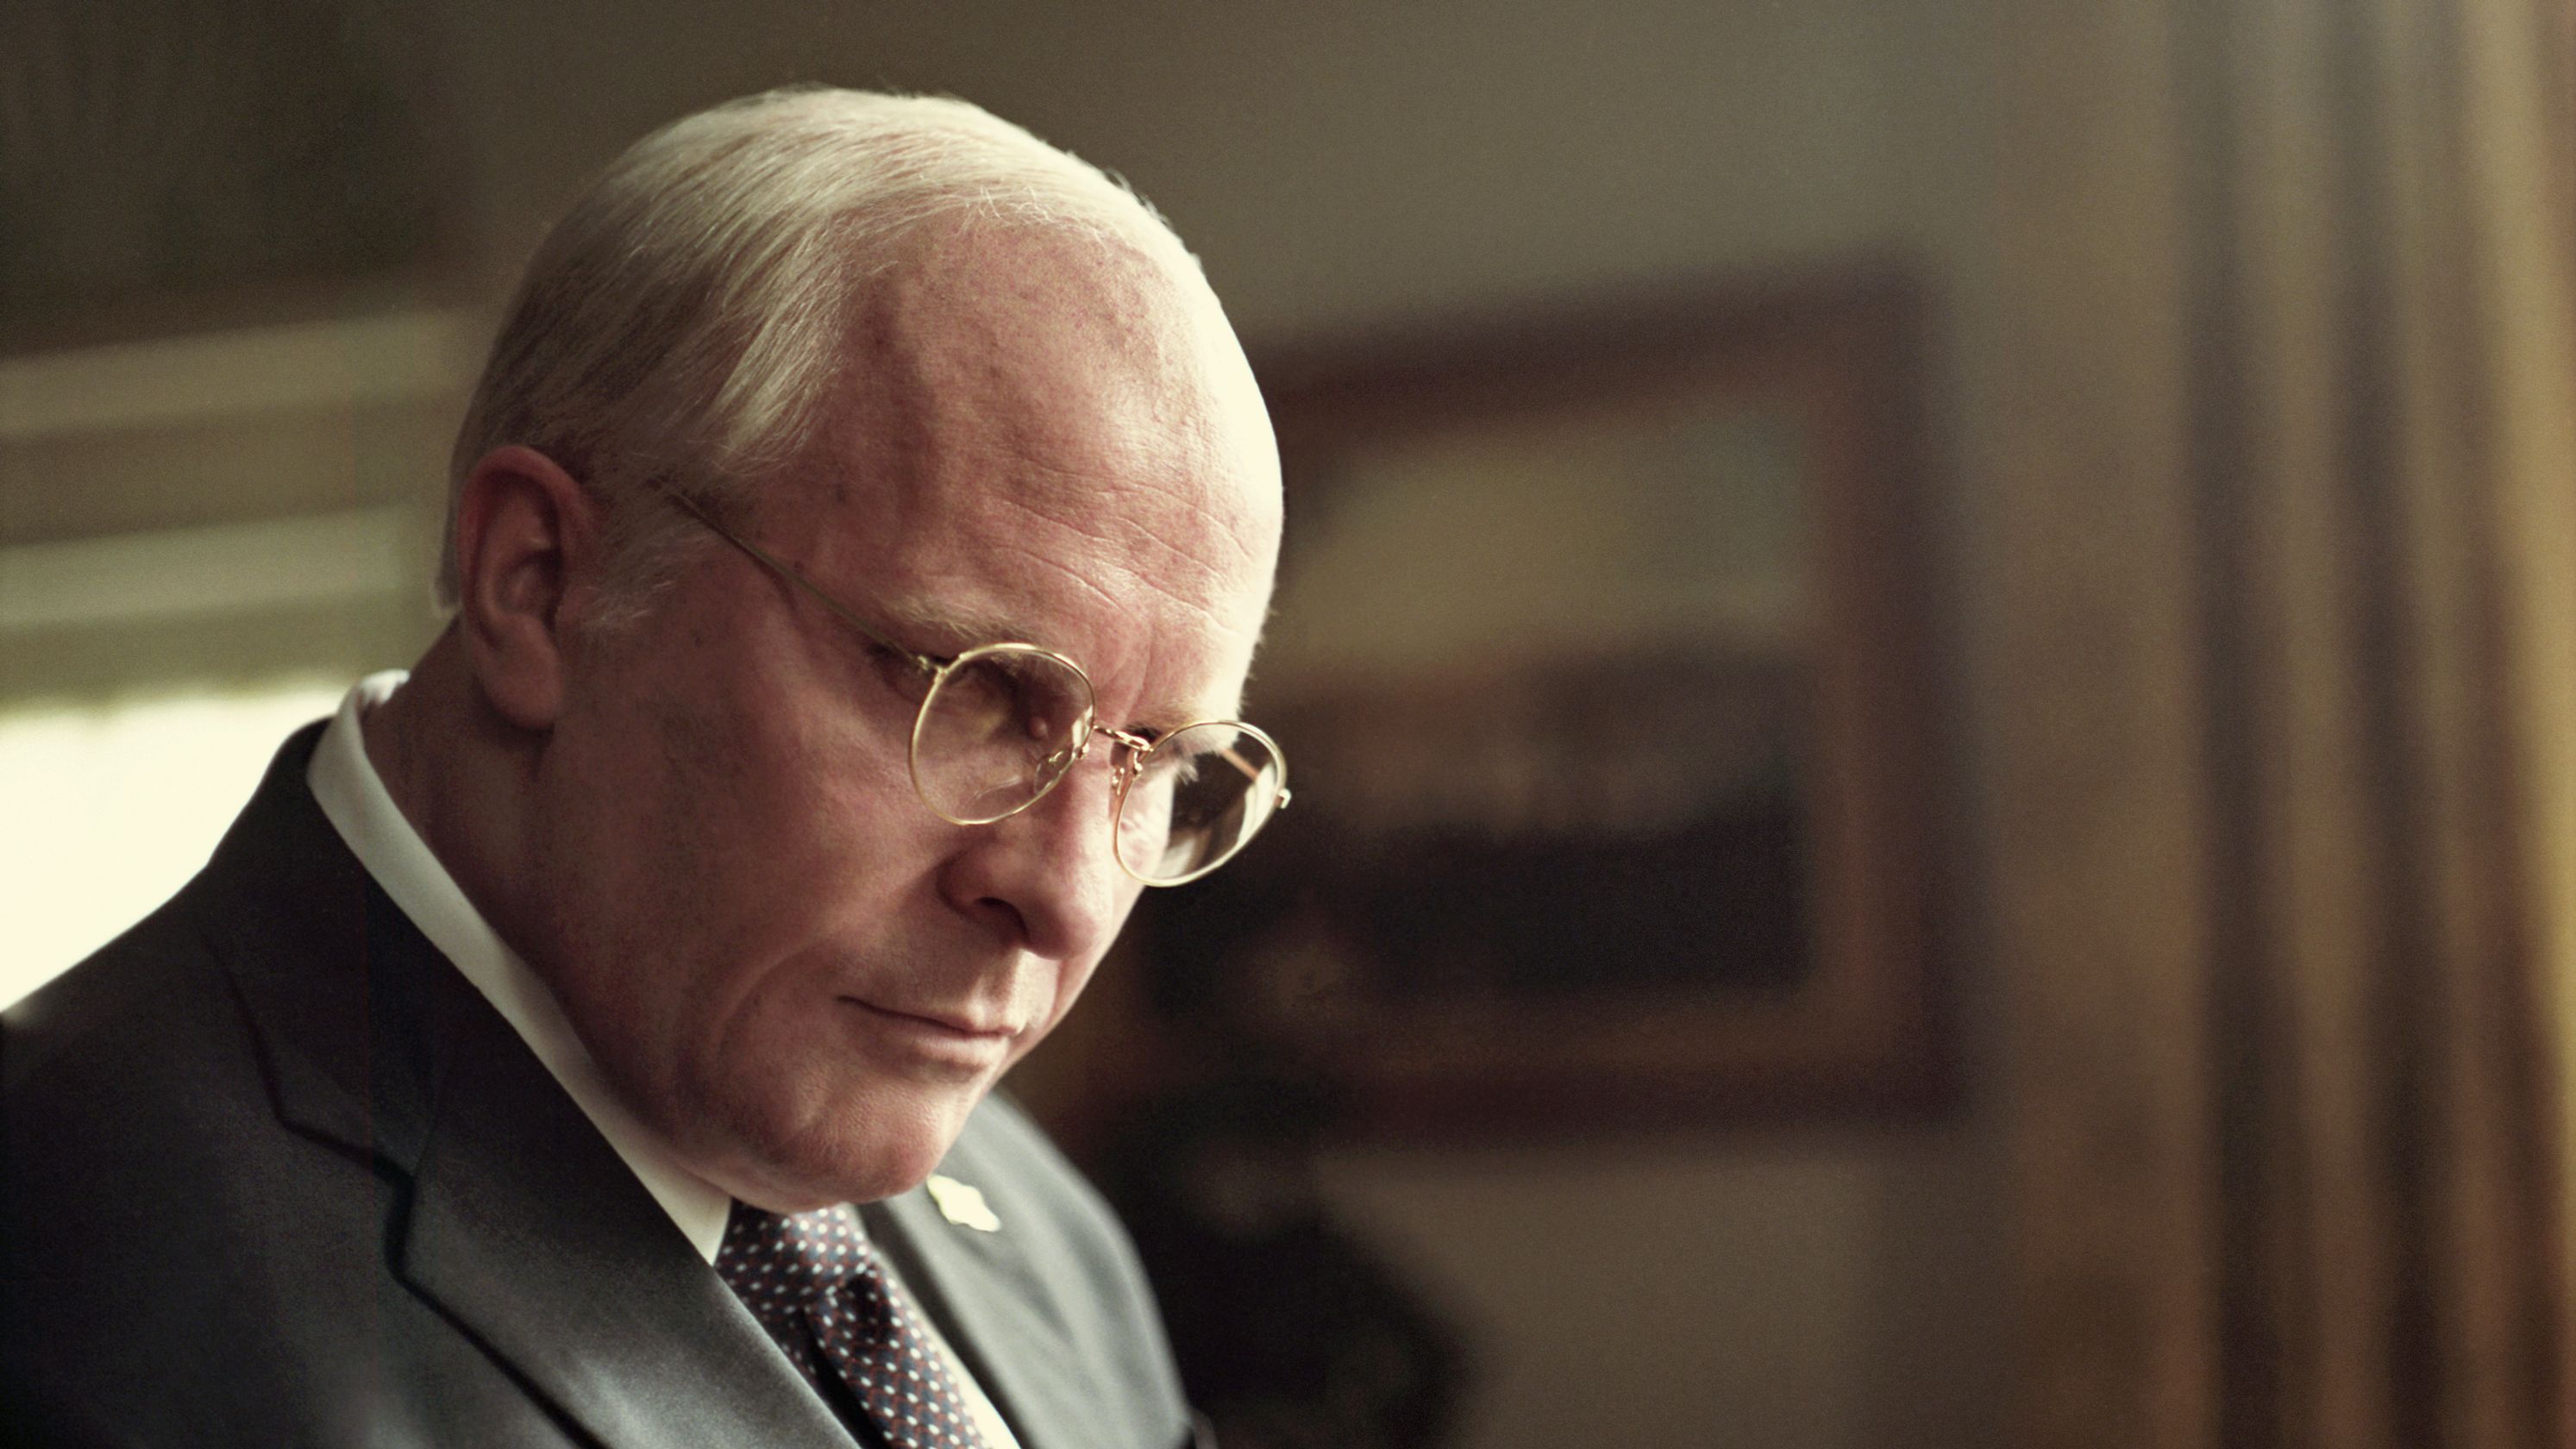 Cheney review 2018 Vice Adam McKay Bale interview Shakespeare